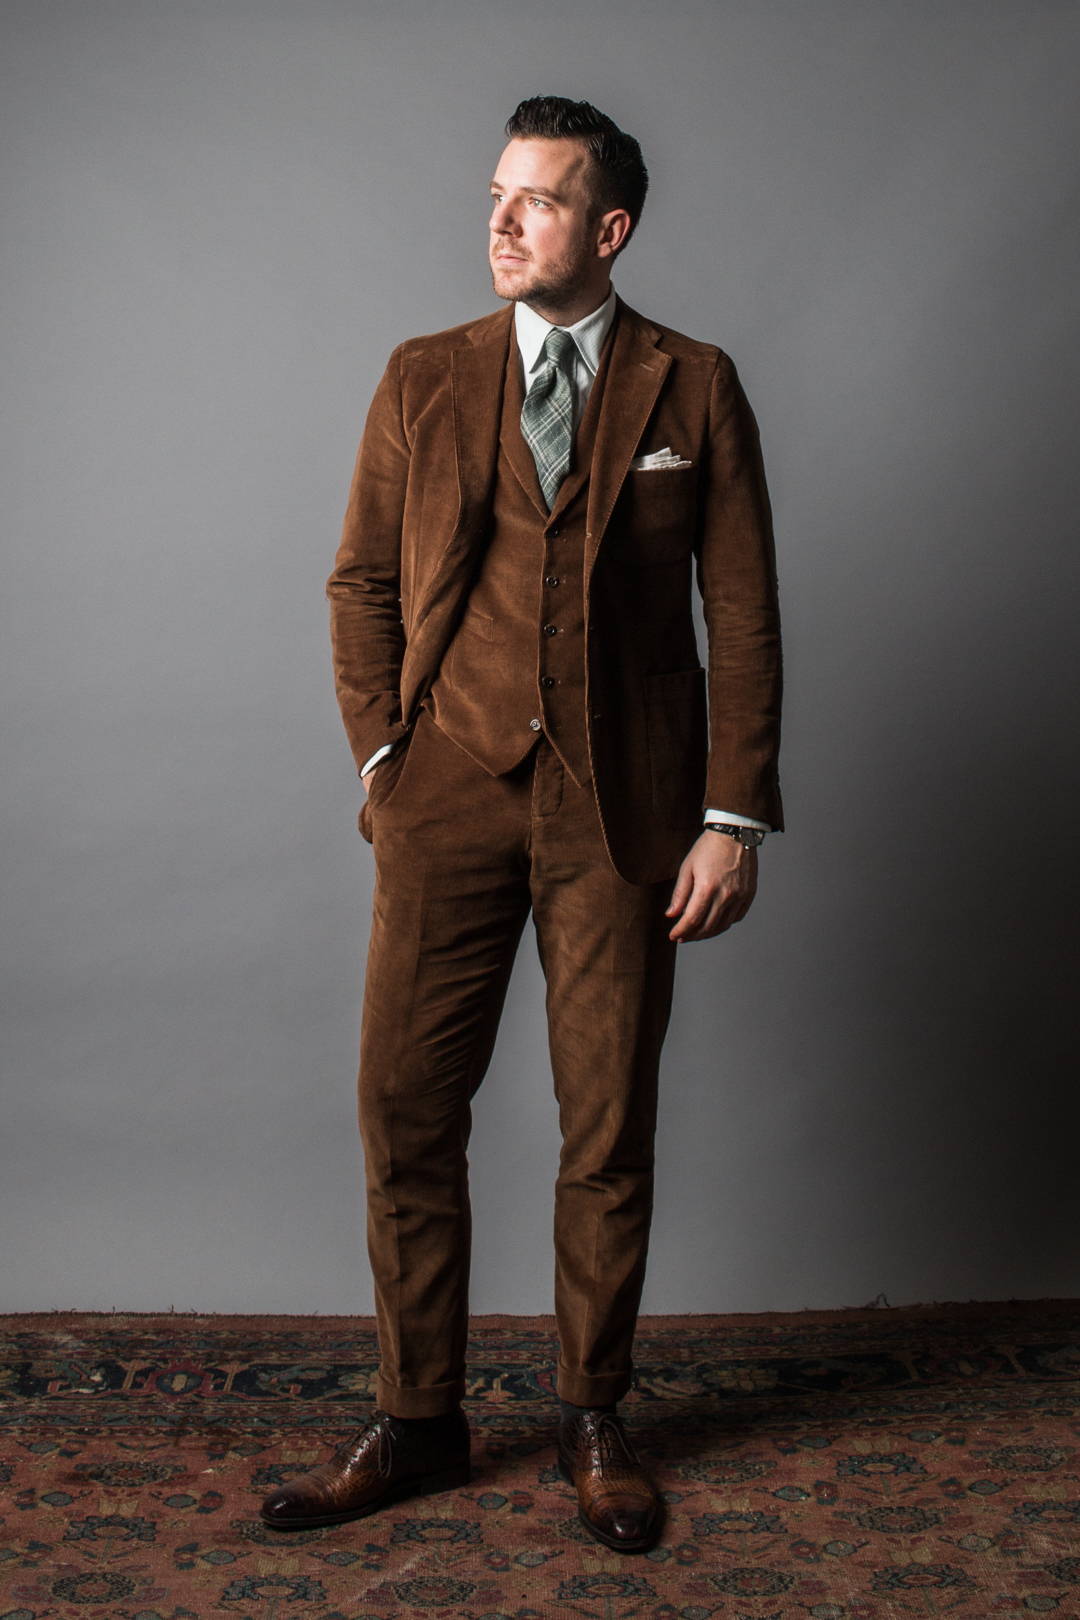 phoi-do-suit-corduroy - Articles Of Style